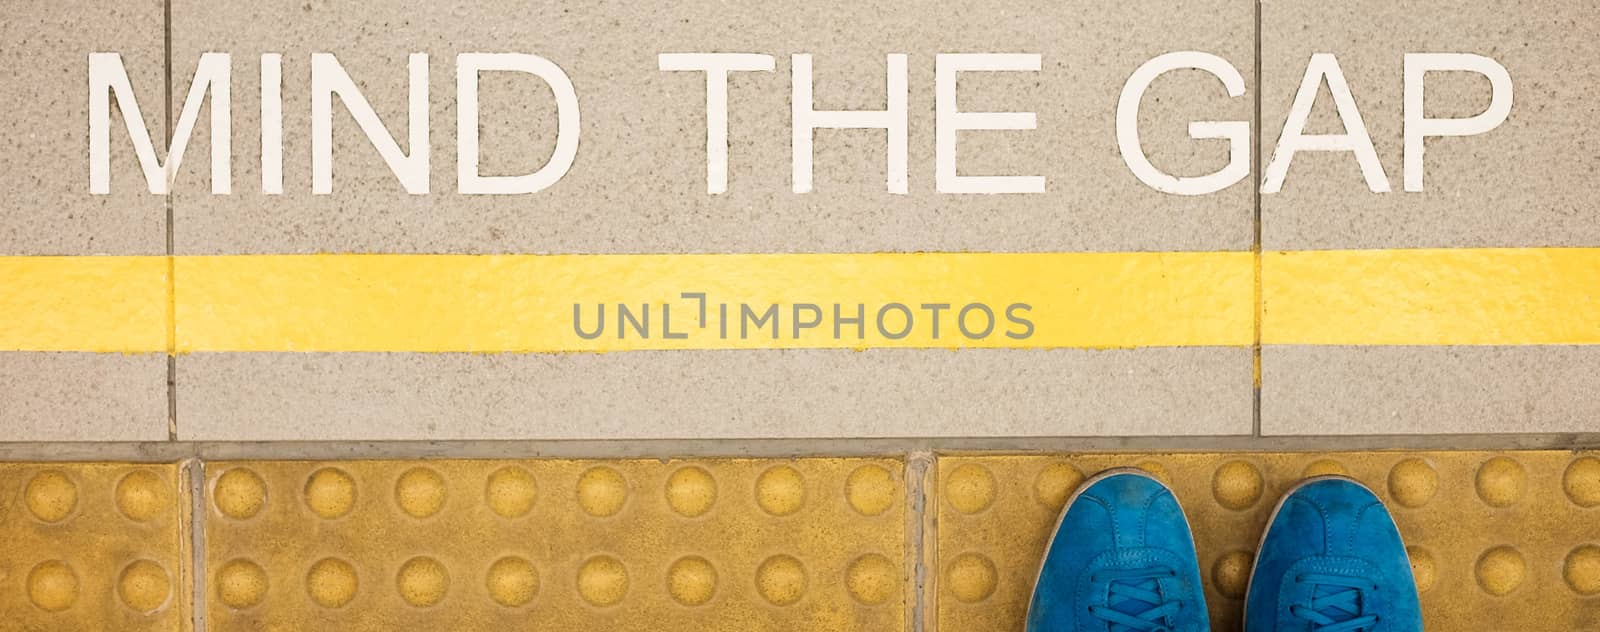 The sign " Mind the gap " painted on train station's platform edge